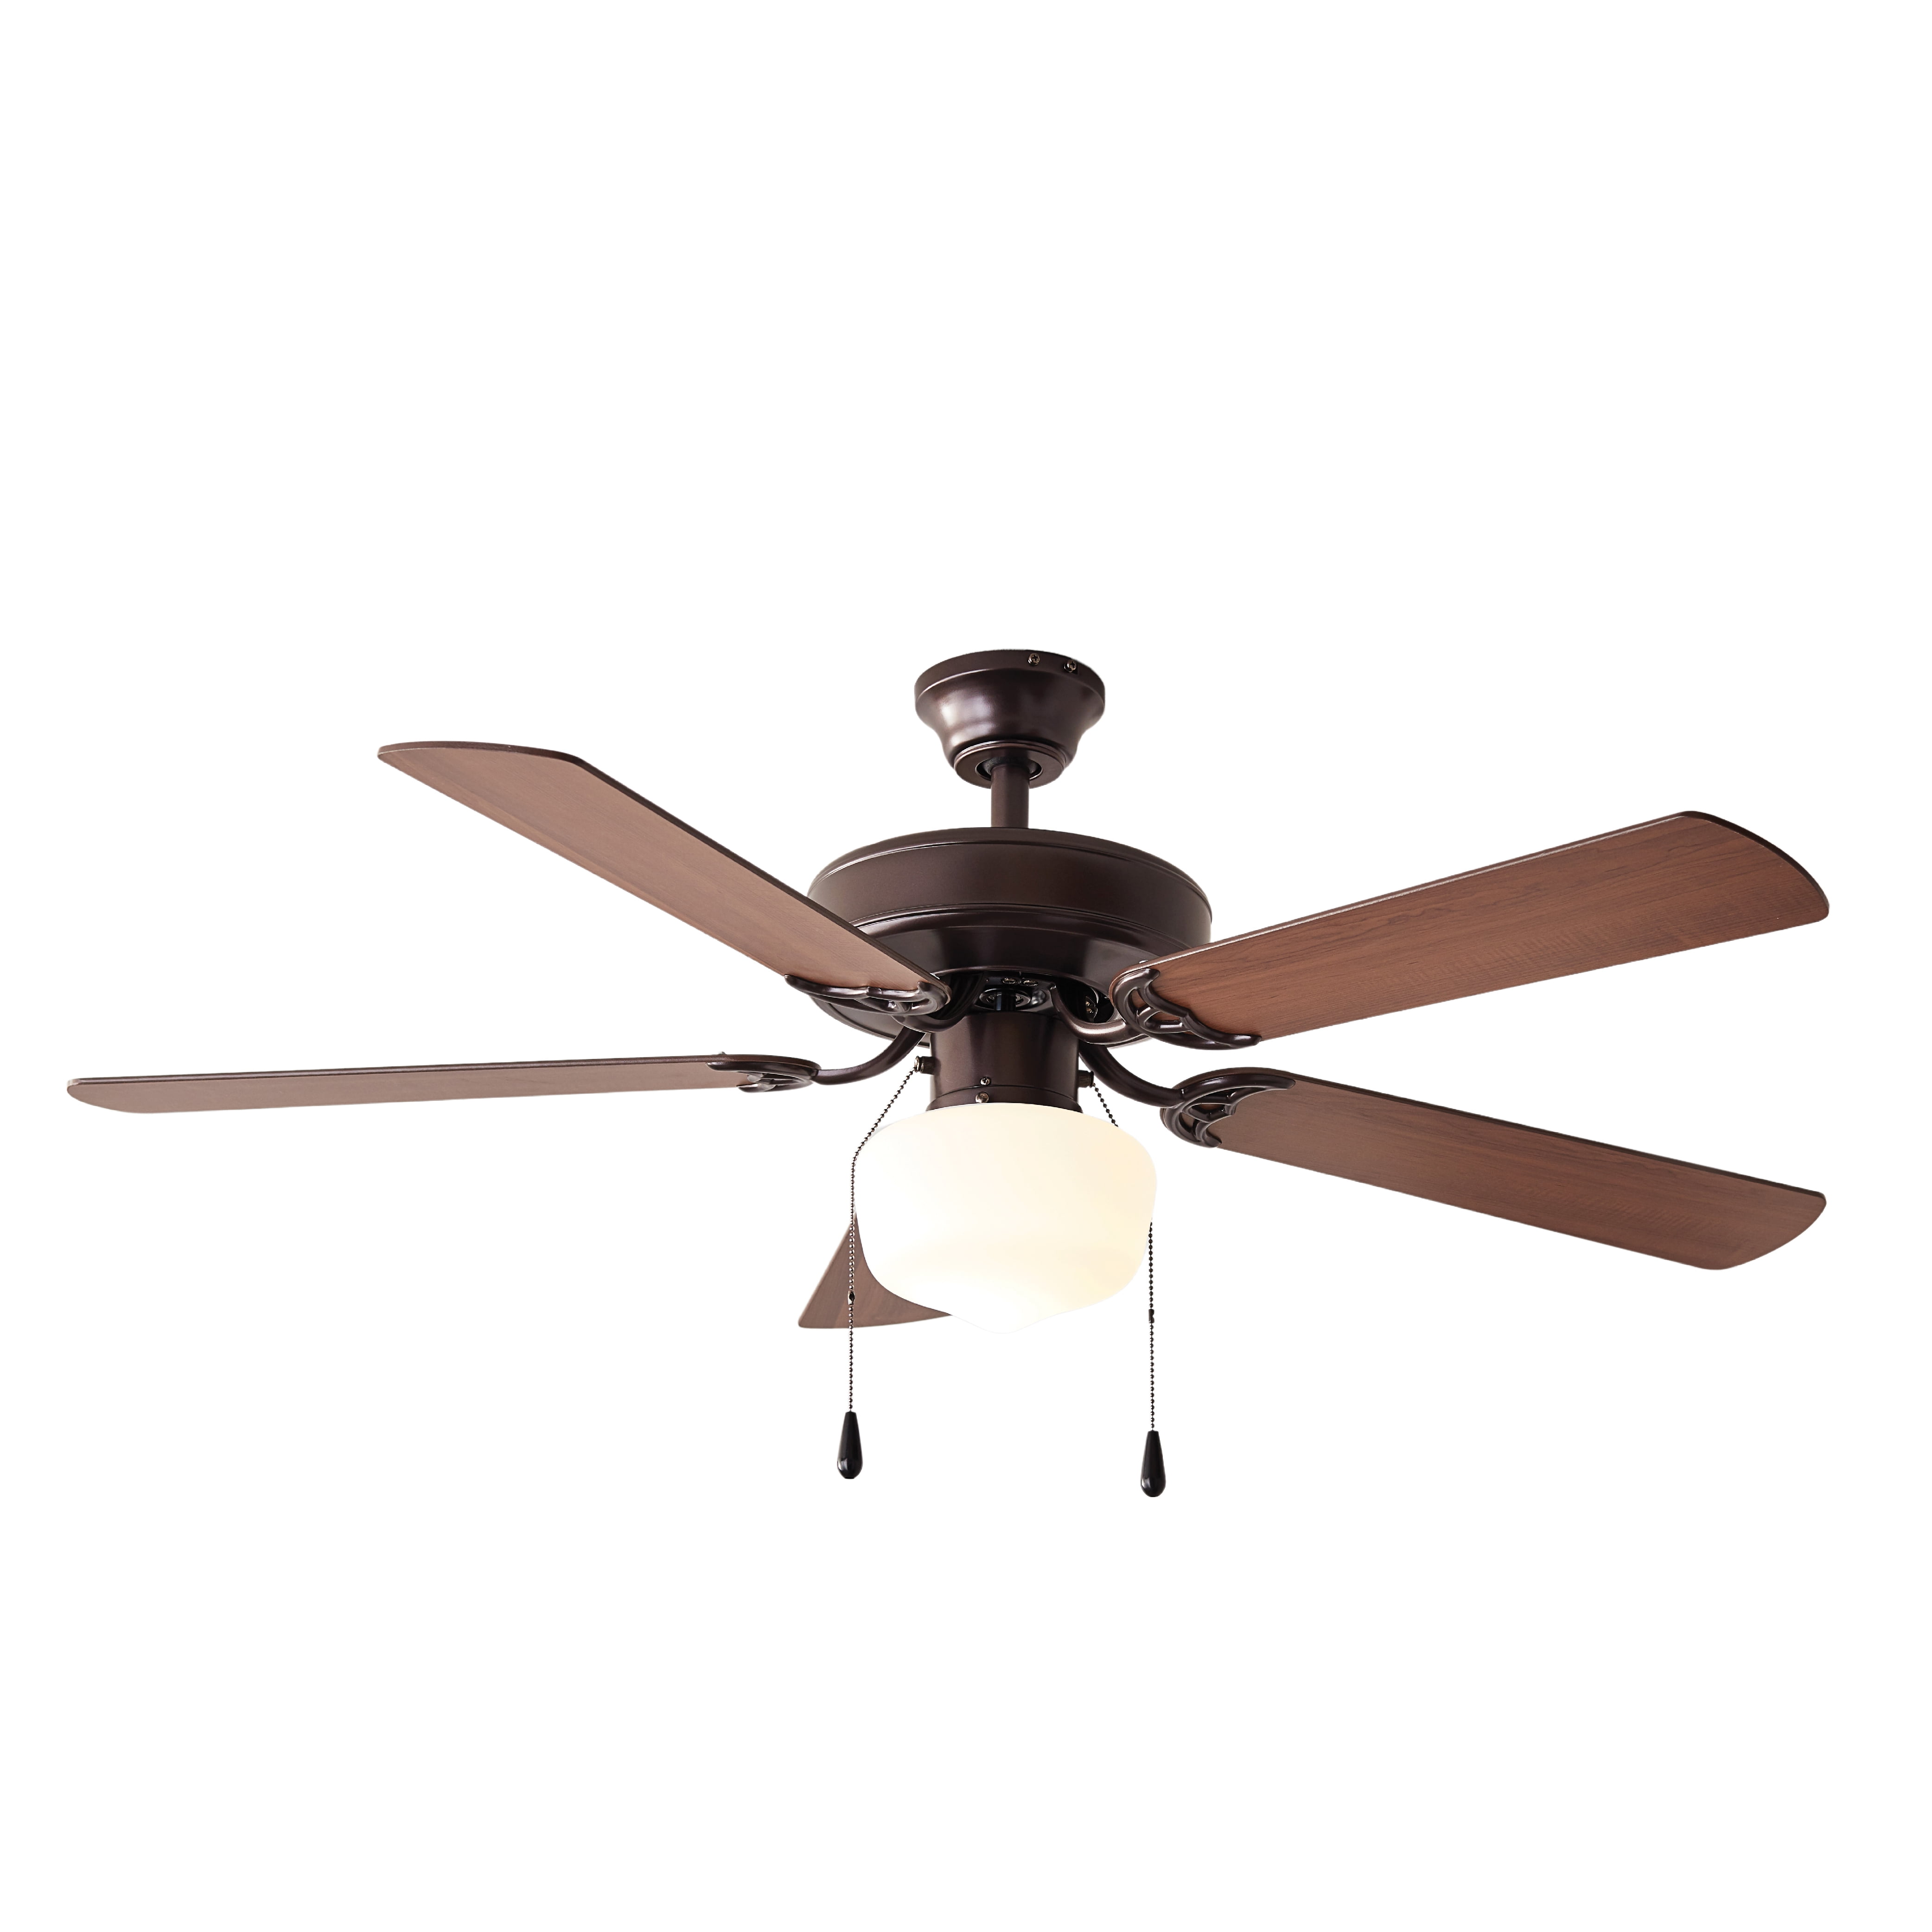 Mainstays 52 inch Downrod Ceiling Fan with Light Kit, Bronze, 5